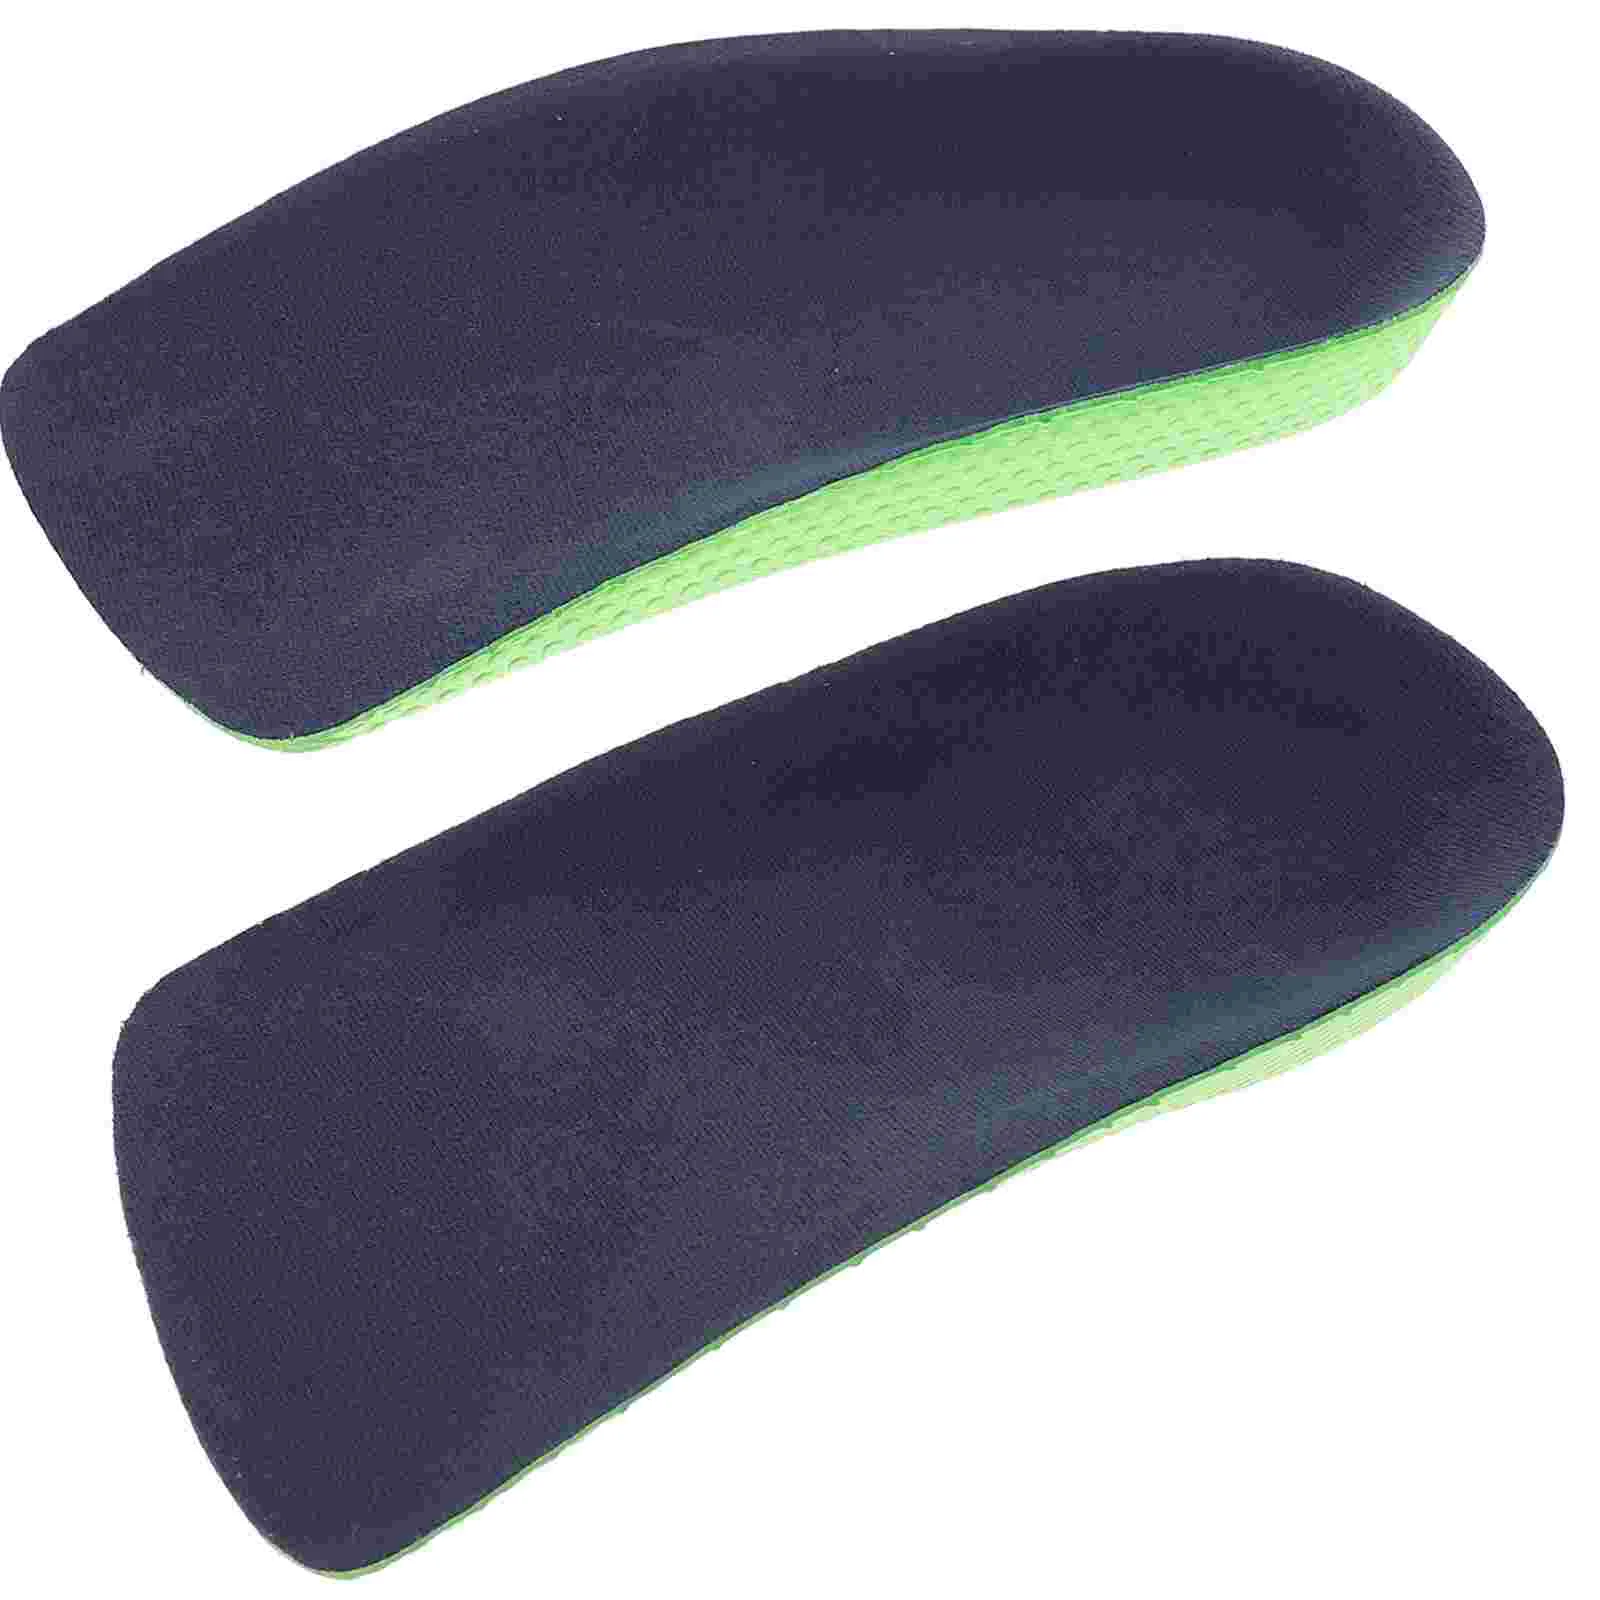 

1 Pair of Damping Insoles Arch Supports Thin Shoe Cushions Shoe Pads for Outdoor Size L Green and Blue